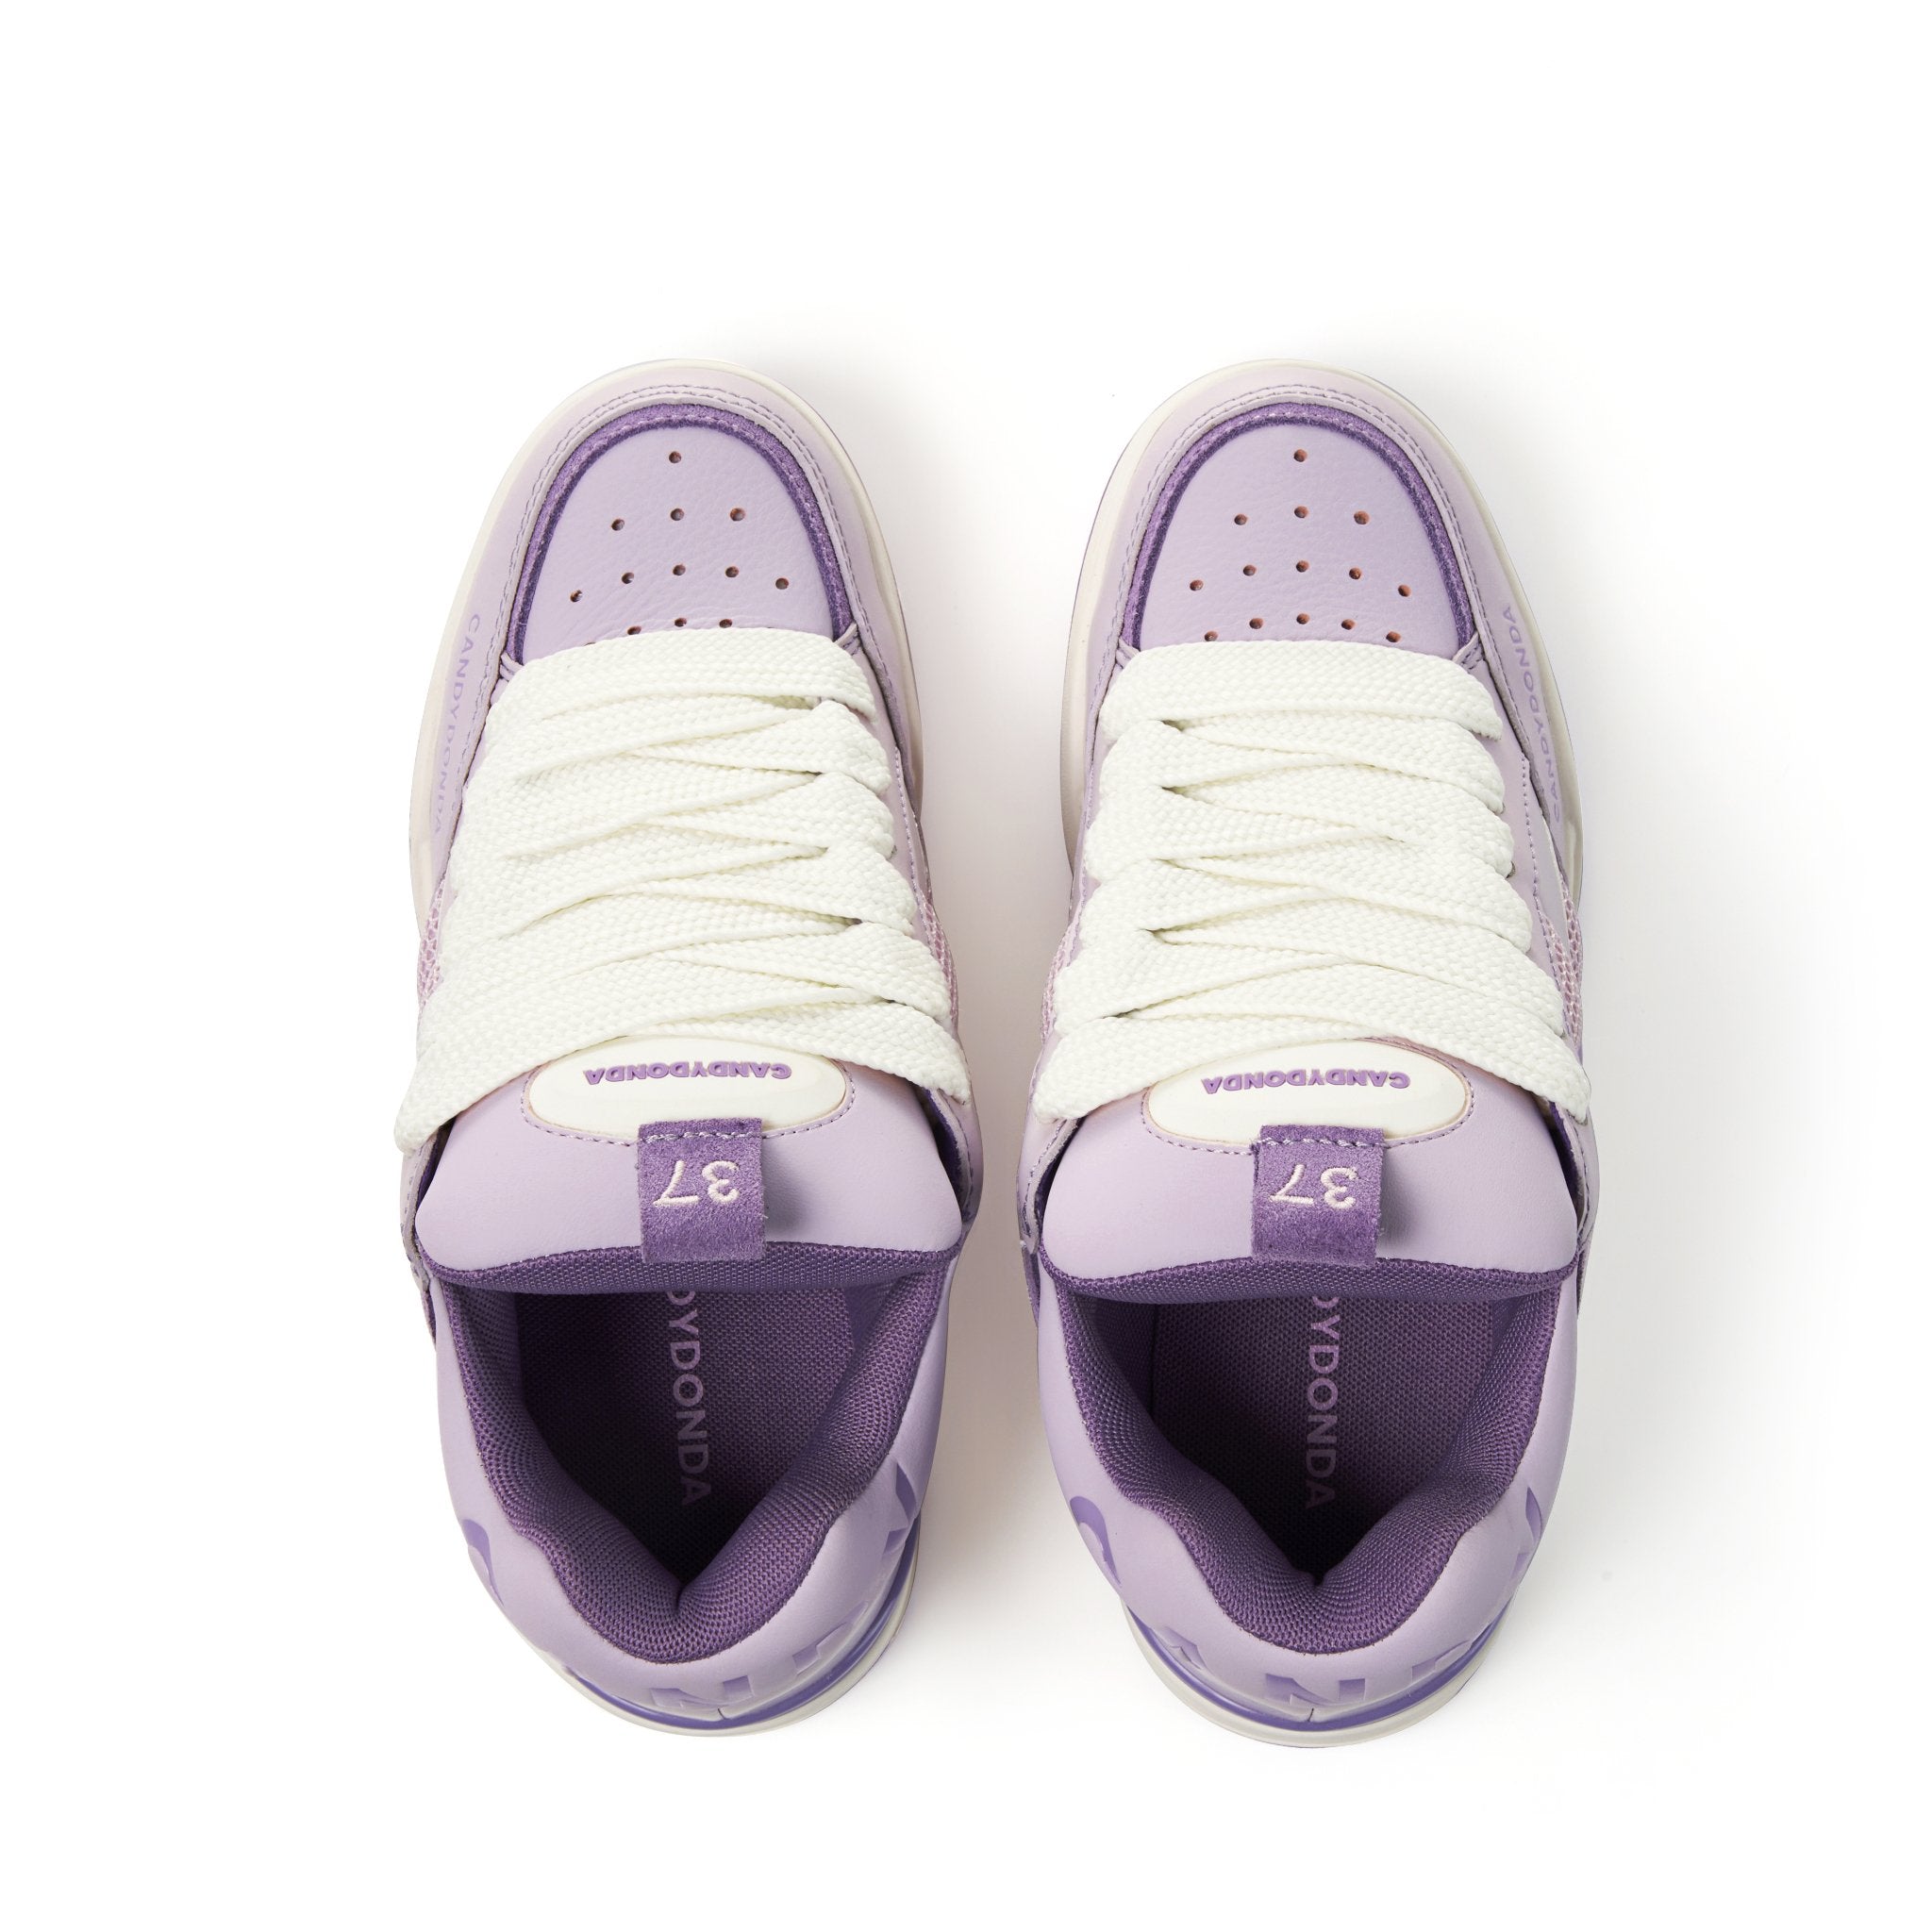 CANDYDONDA Sour Grape Curbmelo Sneaker | MADA IN CHINA